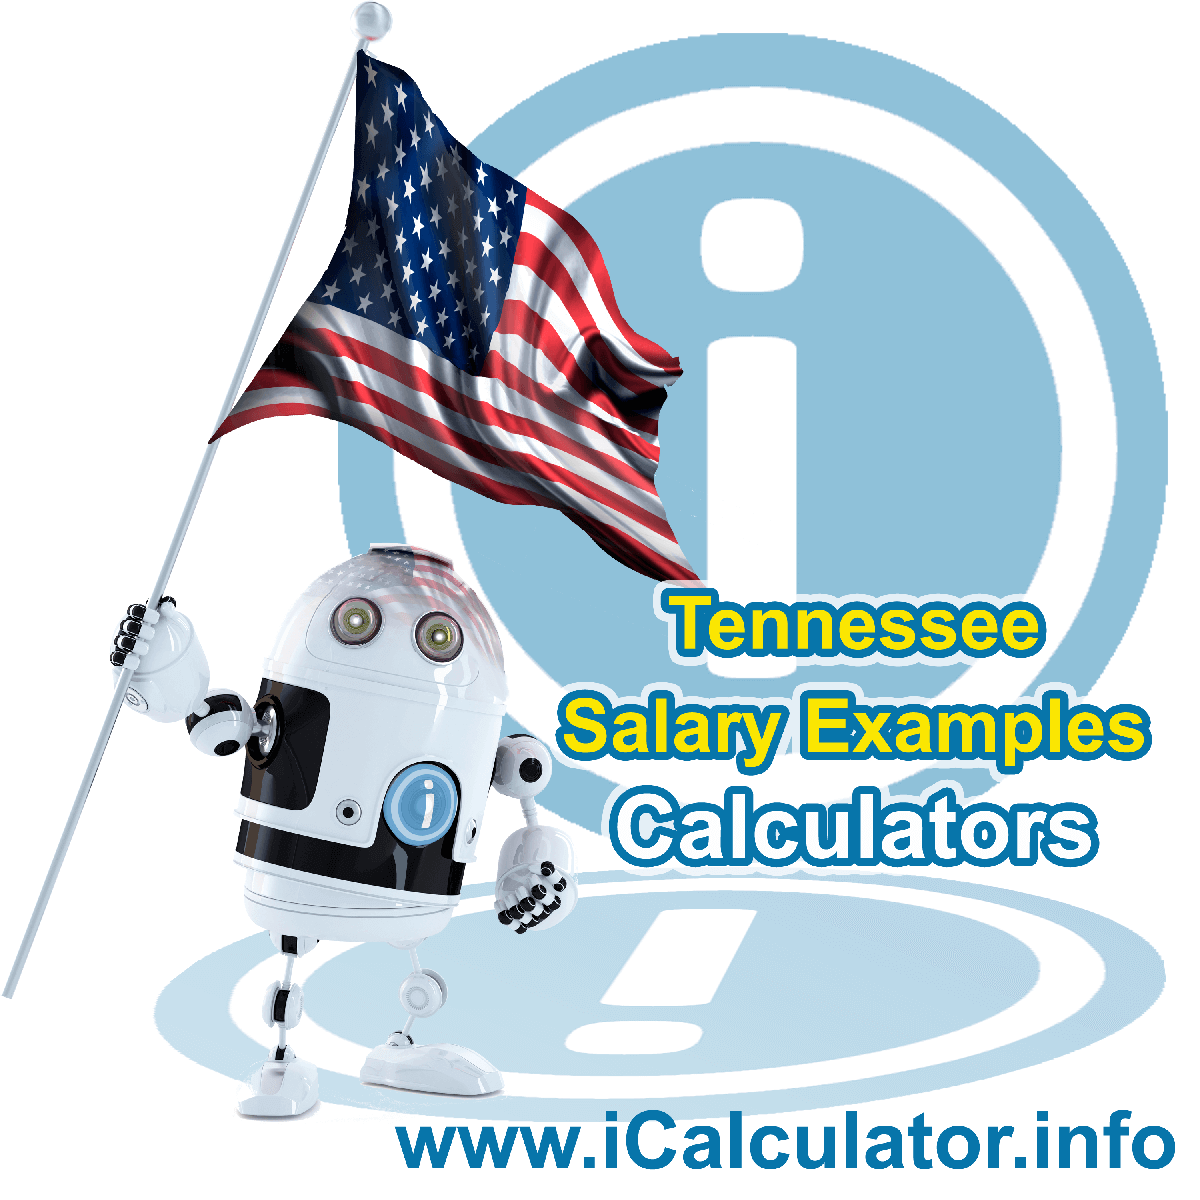 Tennessee Salary Example for $210,000.00 in 2022 | iCalculator™ | $210,000.00 salary example for employee and employer paying Tennessee State tincome taxes. Detailed salary after tax calculation including Tennessee State Tax, Federal State Tax, Medicare Deductions, Social Security, Capital Gains and other income tax and salary deductions complete with supporting Tennessee state tax tables 